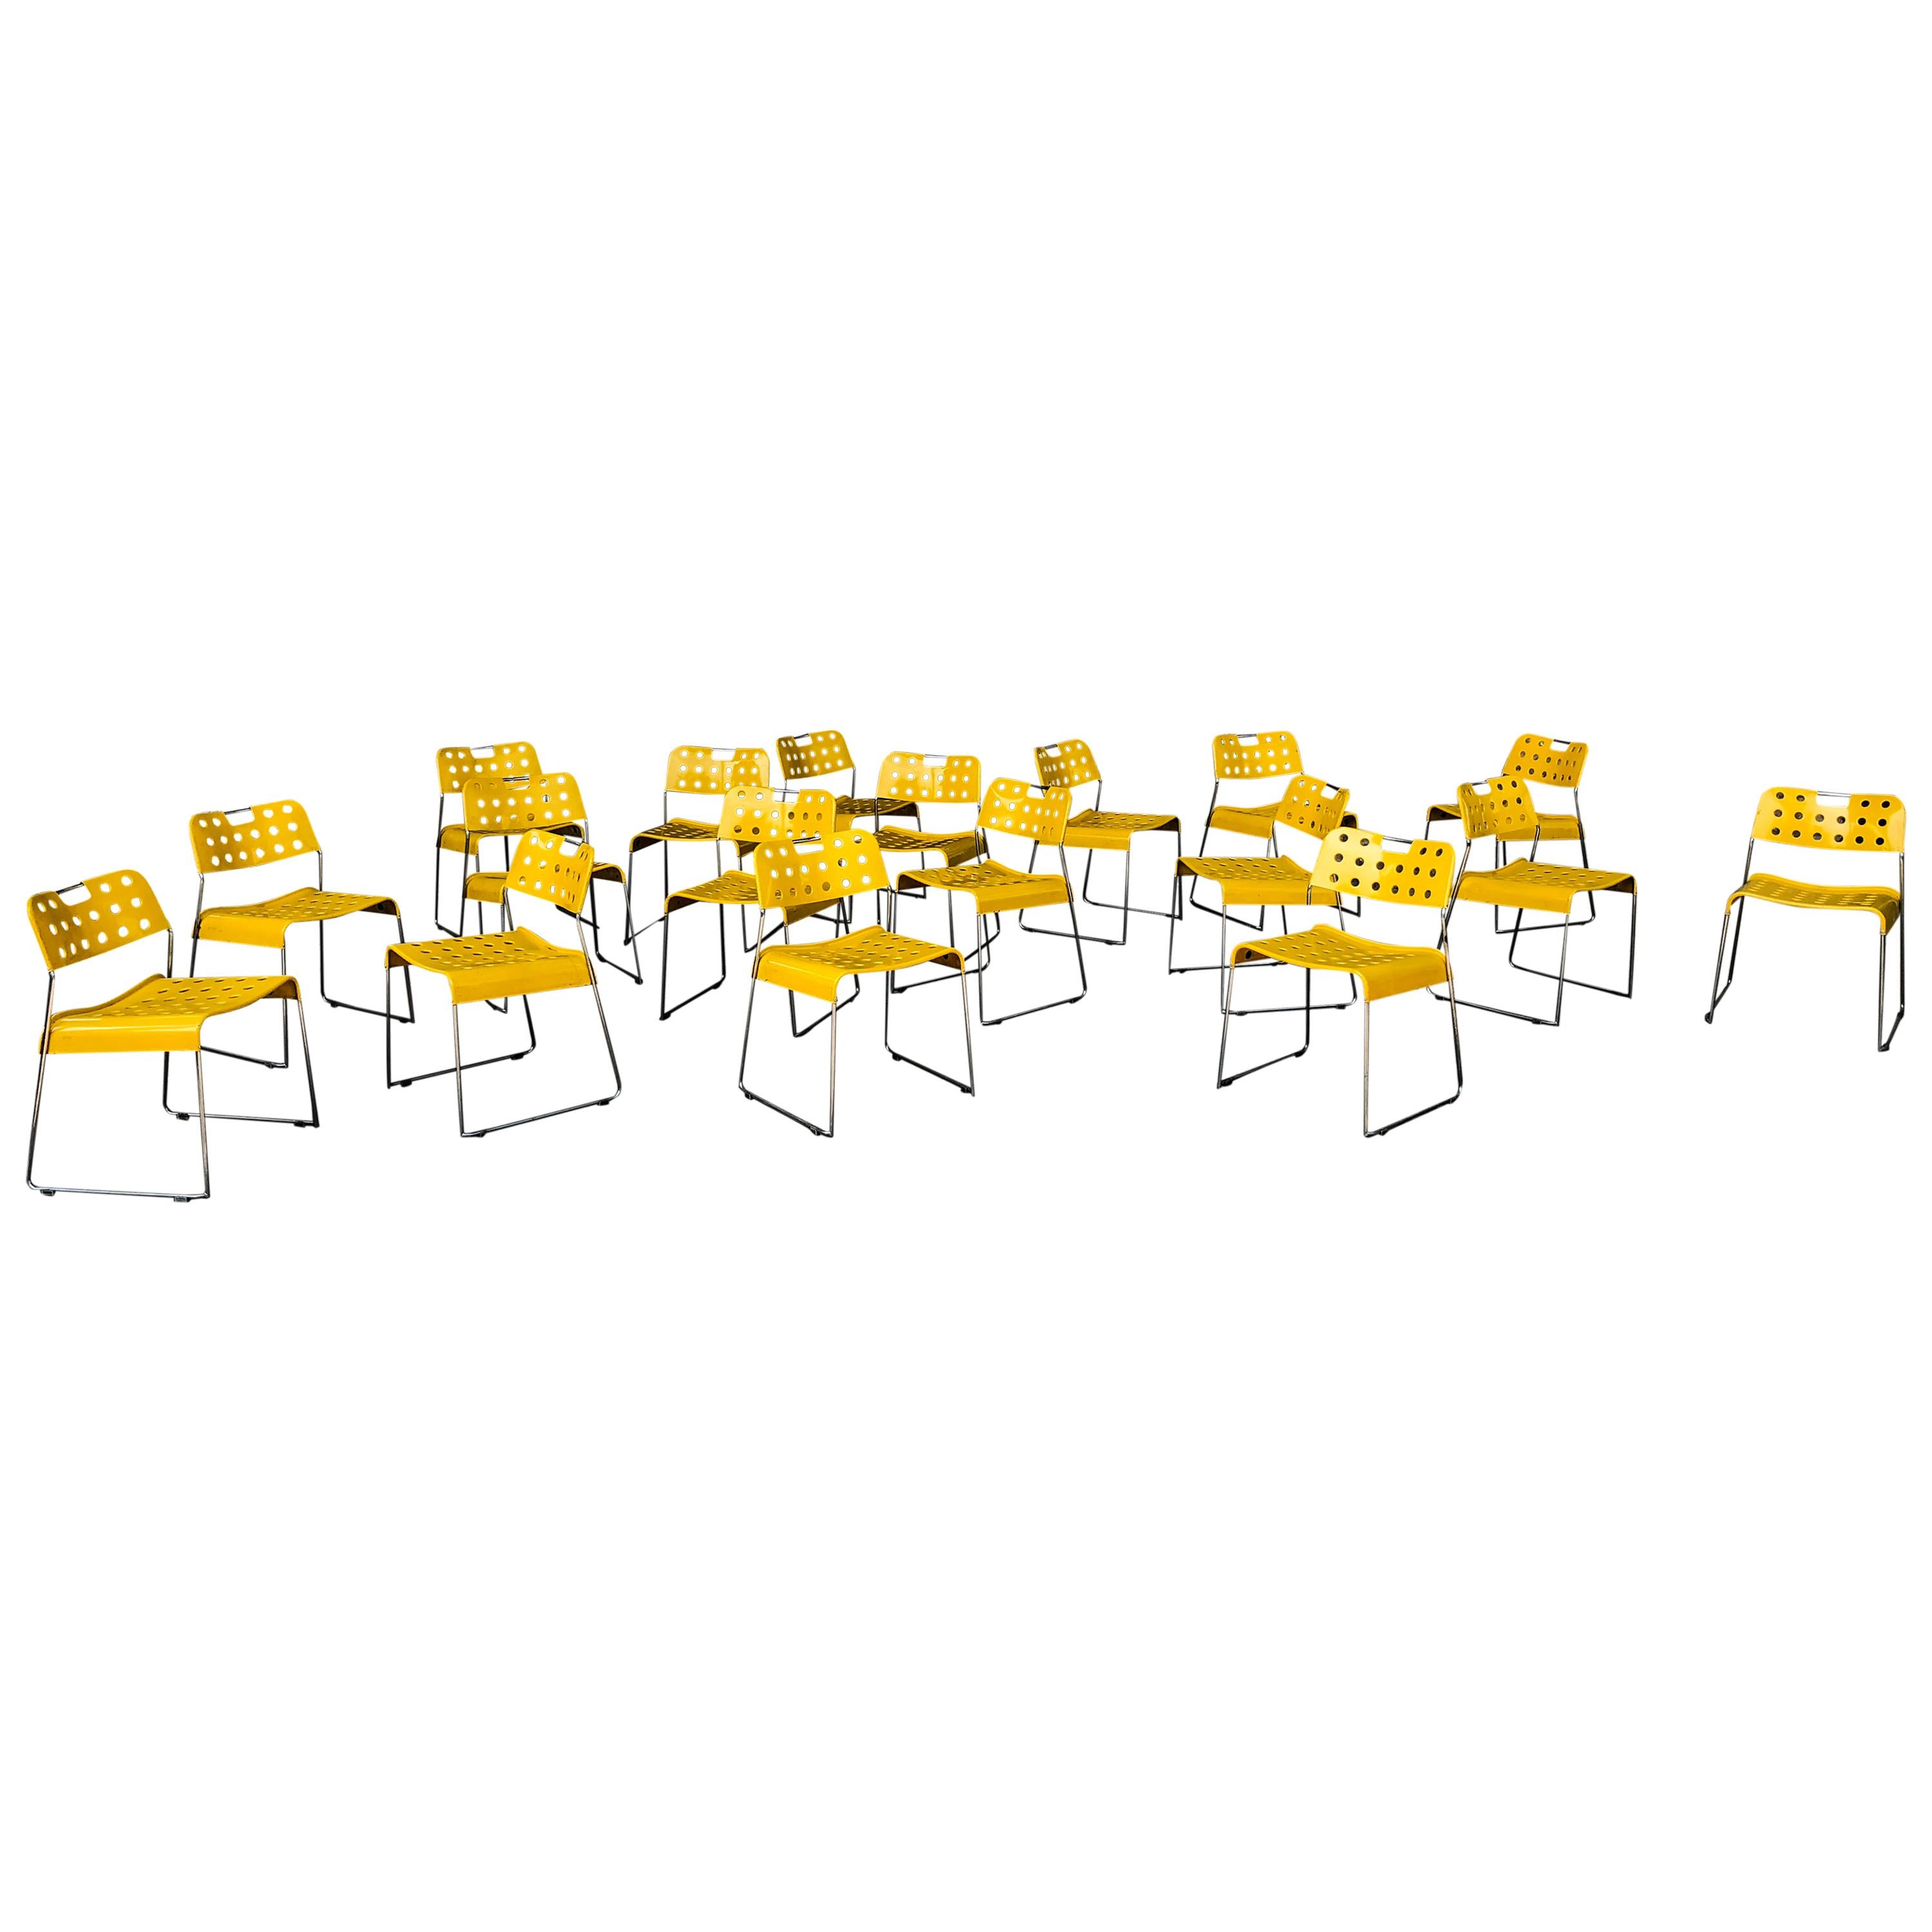 Rodney Kinsman Space Age Yellow Omstak Chair for Bieffeplast, 1971, Set of 6 For Sale 2